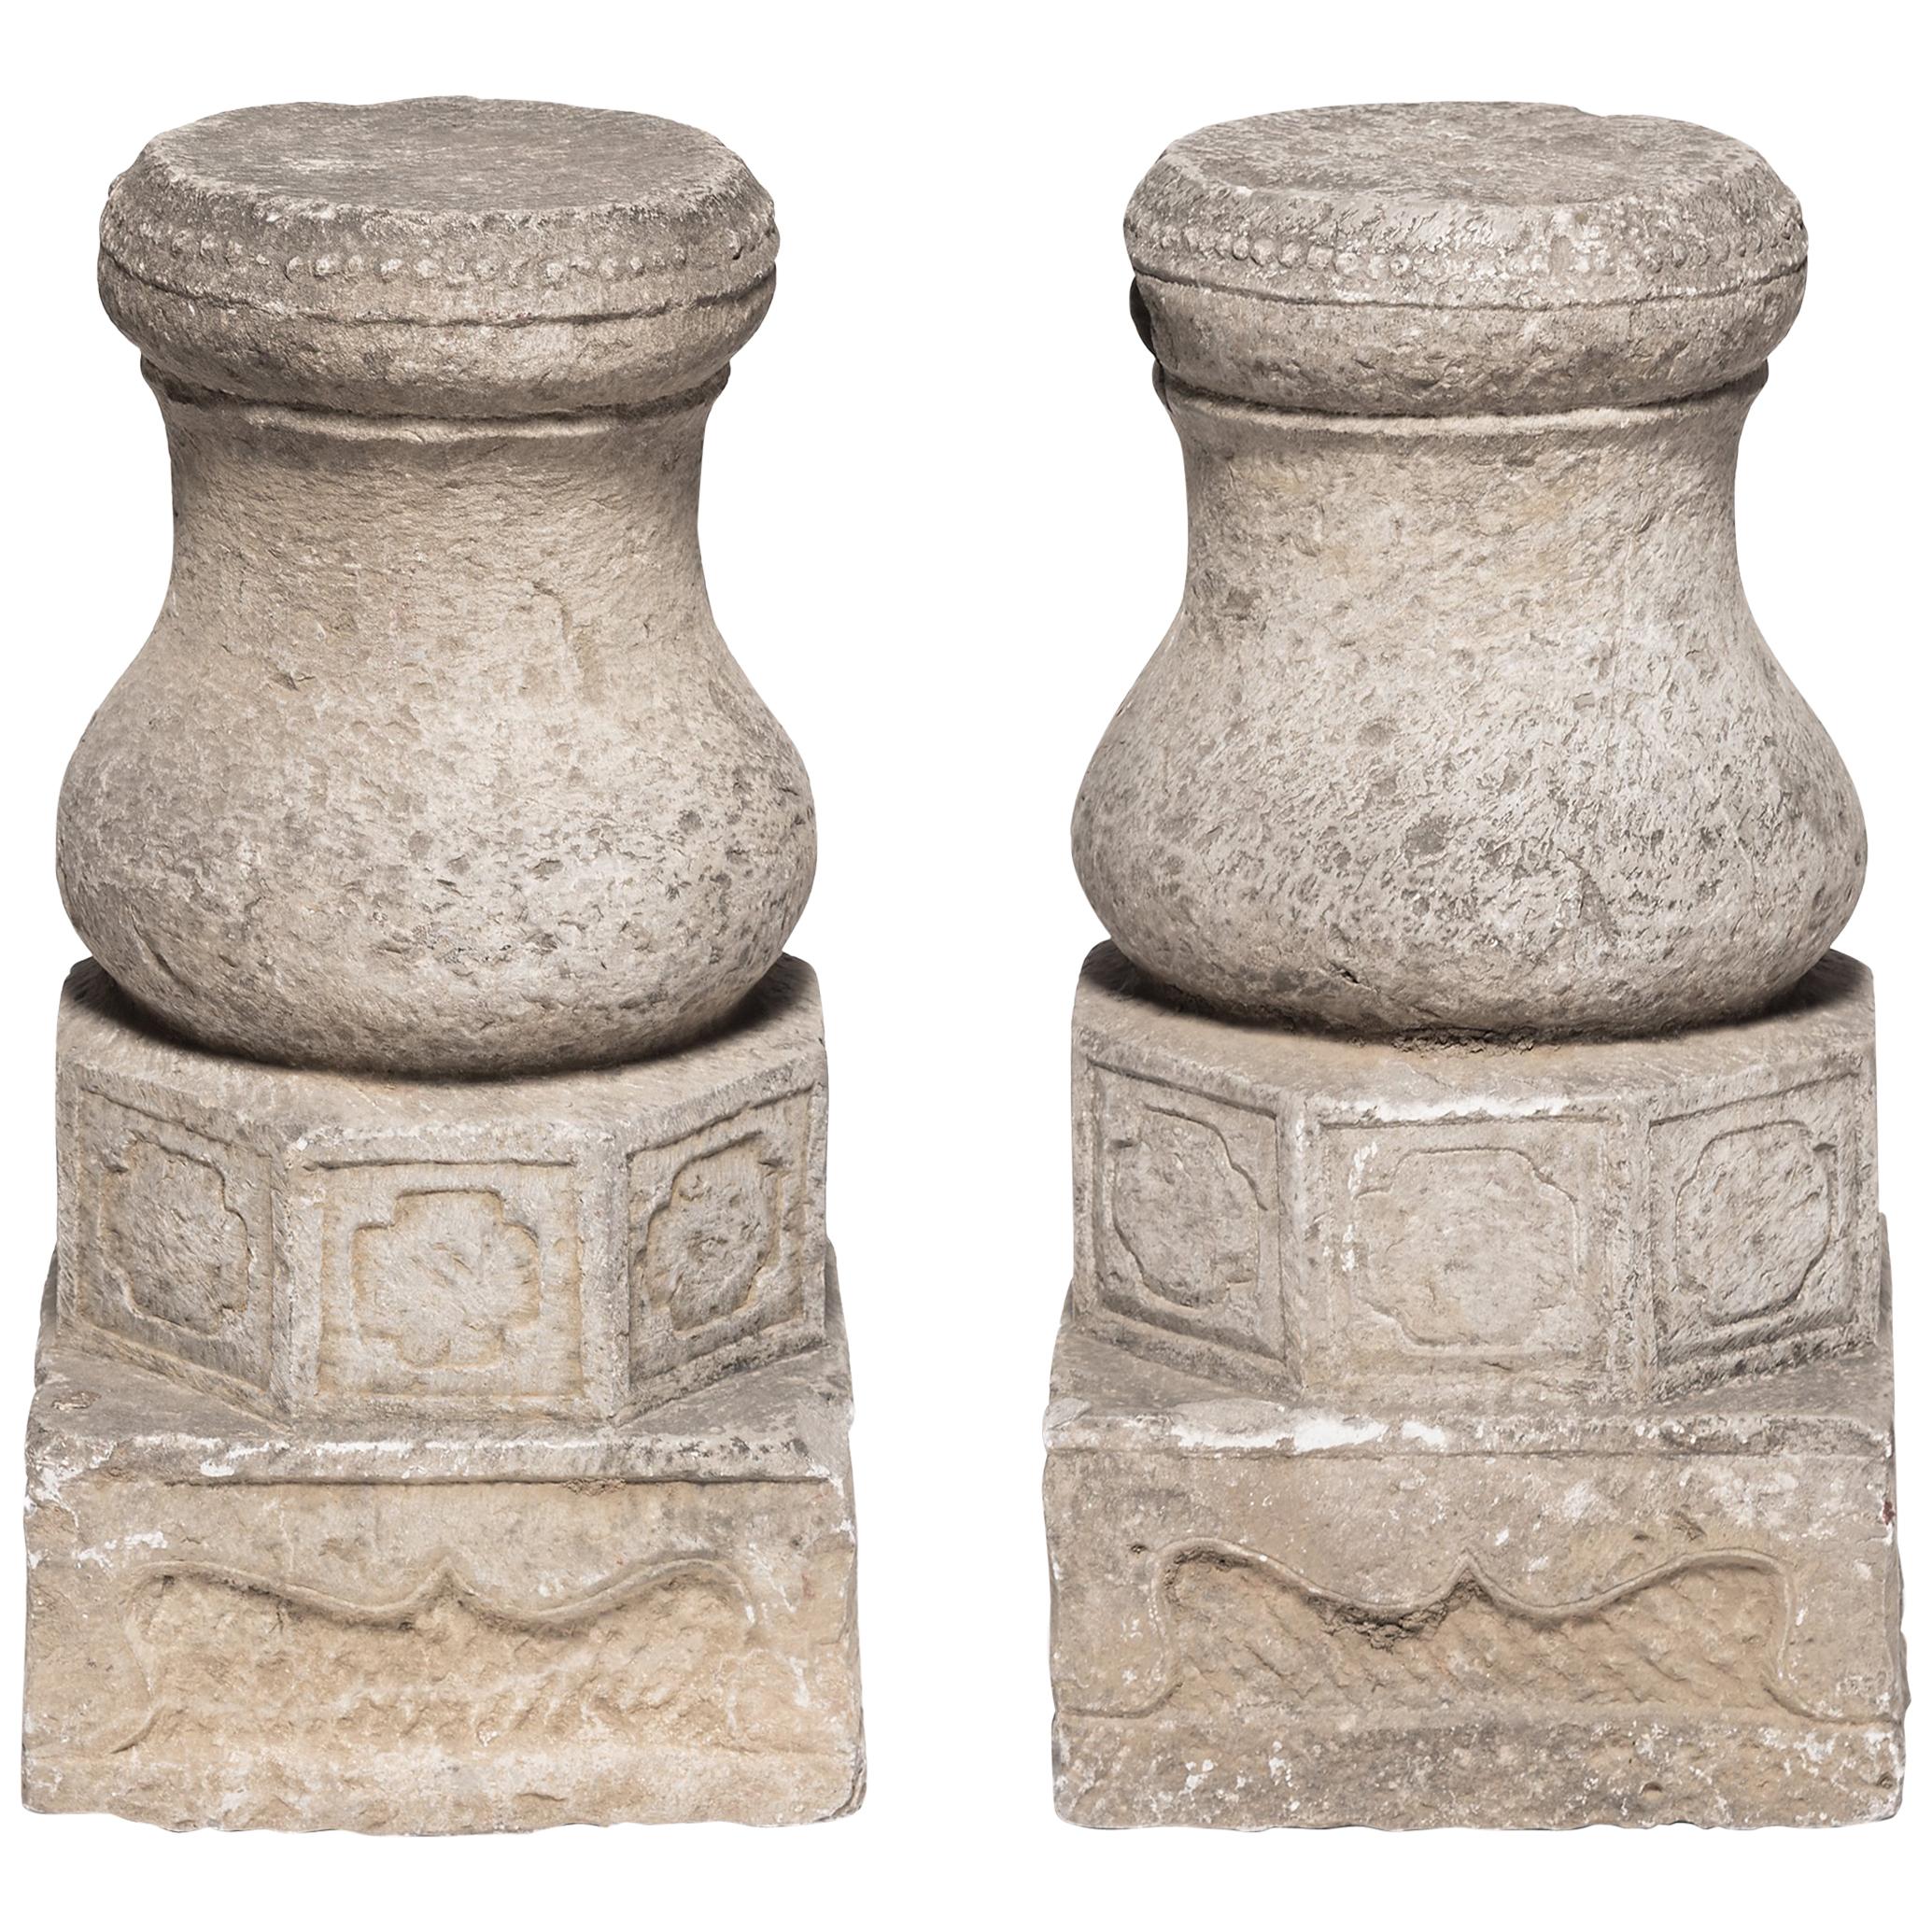 Pair of Chinese Drum Form Column Bases, c. 1850